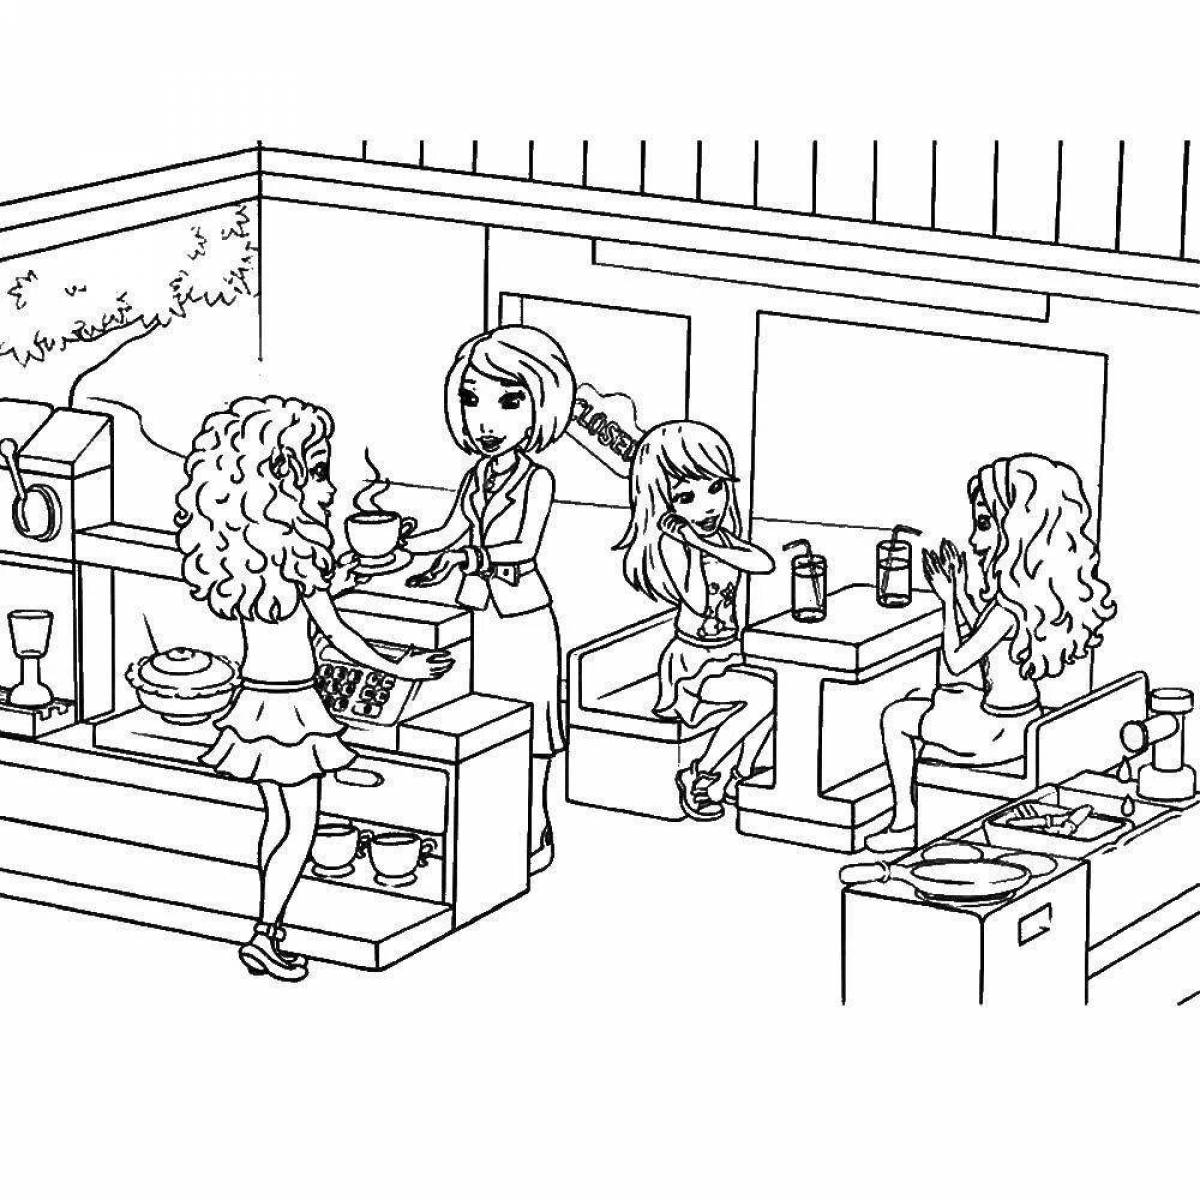 Cute girl shop coloring page